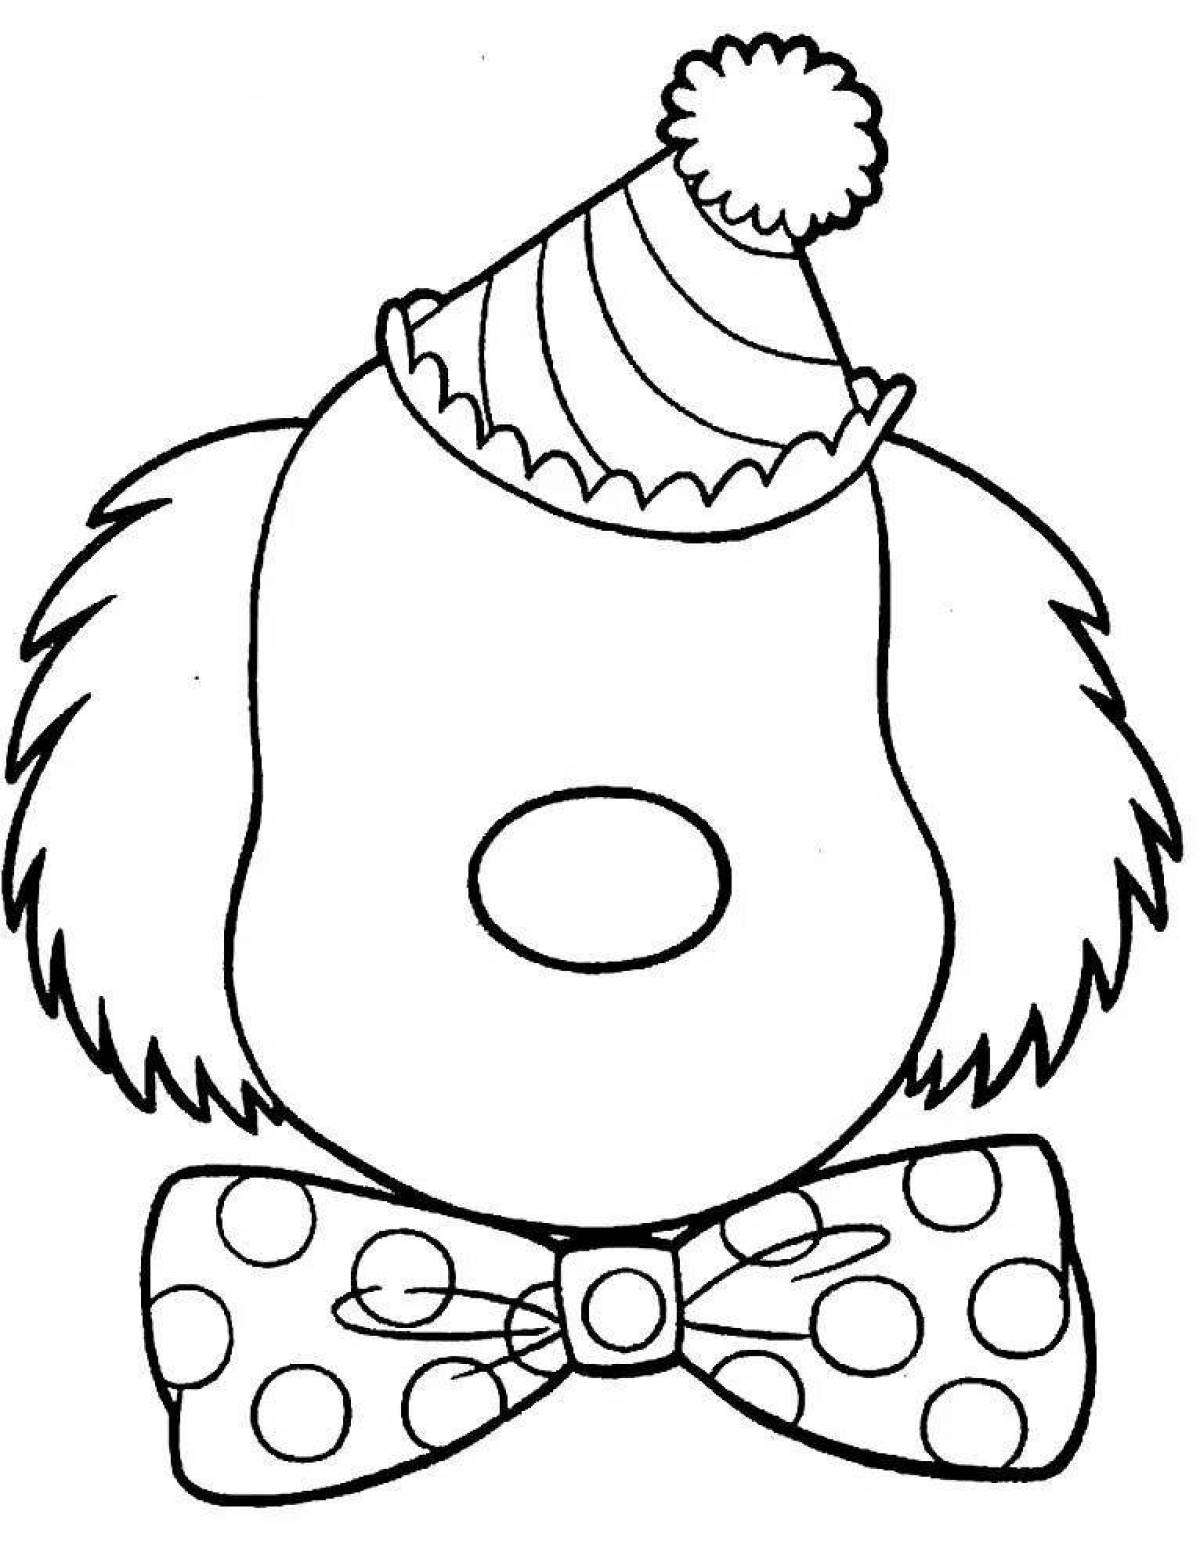 Dazzling clown face coloring page